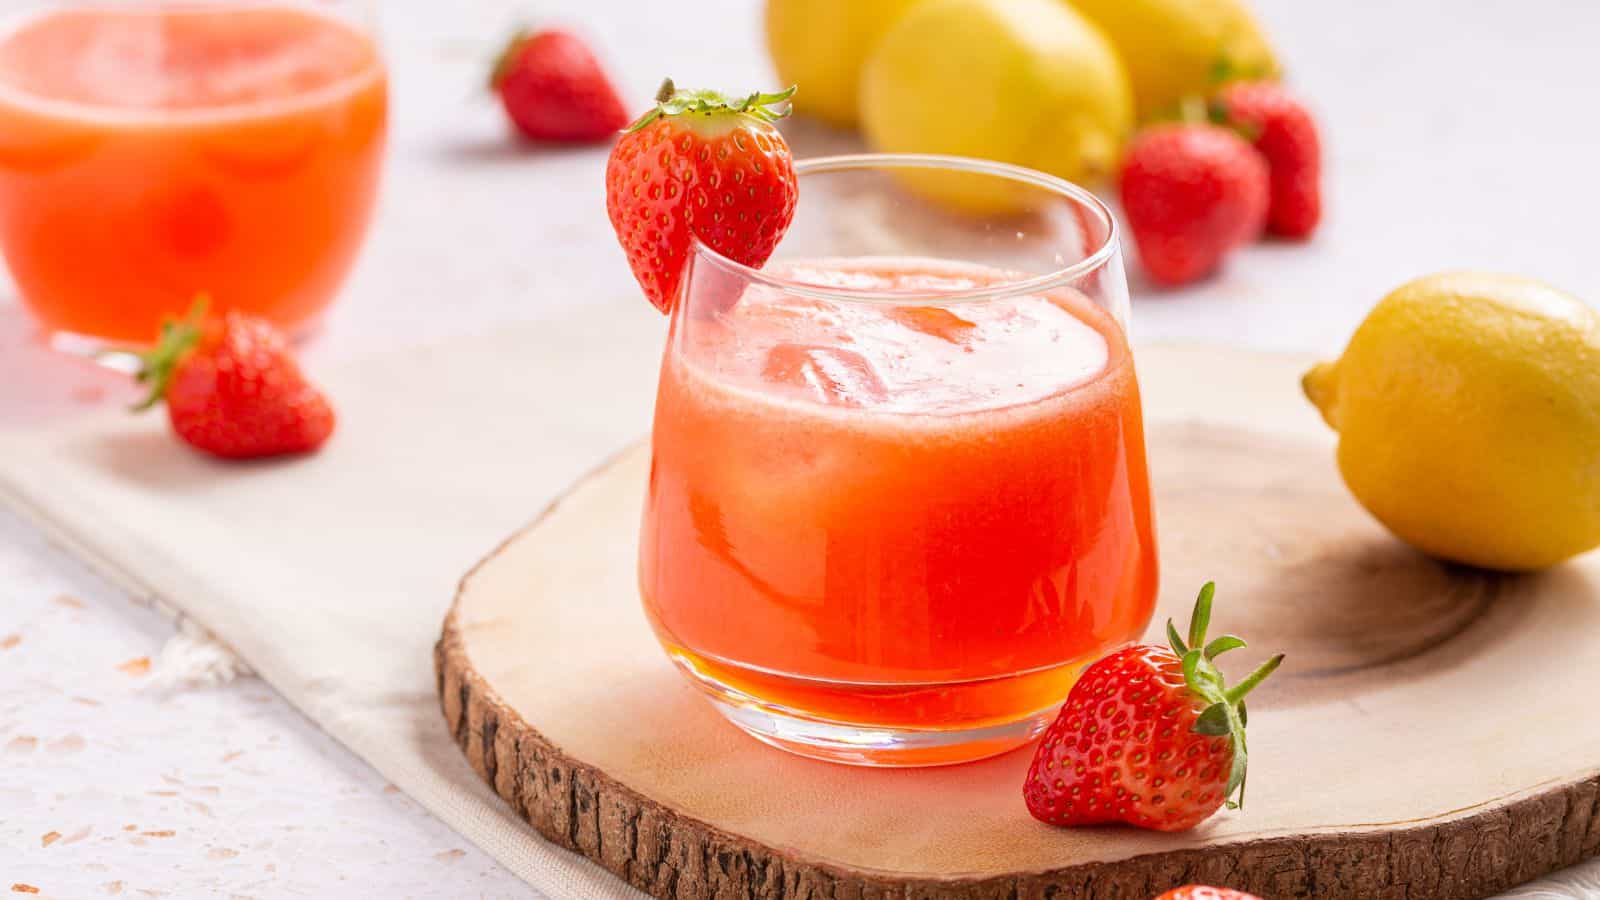 A refreshing glass of strawberry lemonade on a wooden coaster, surrounded by fresh strawberries and lemons, on a light-textured surface.